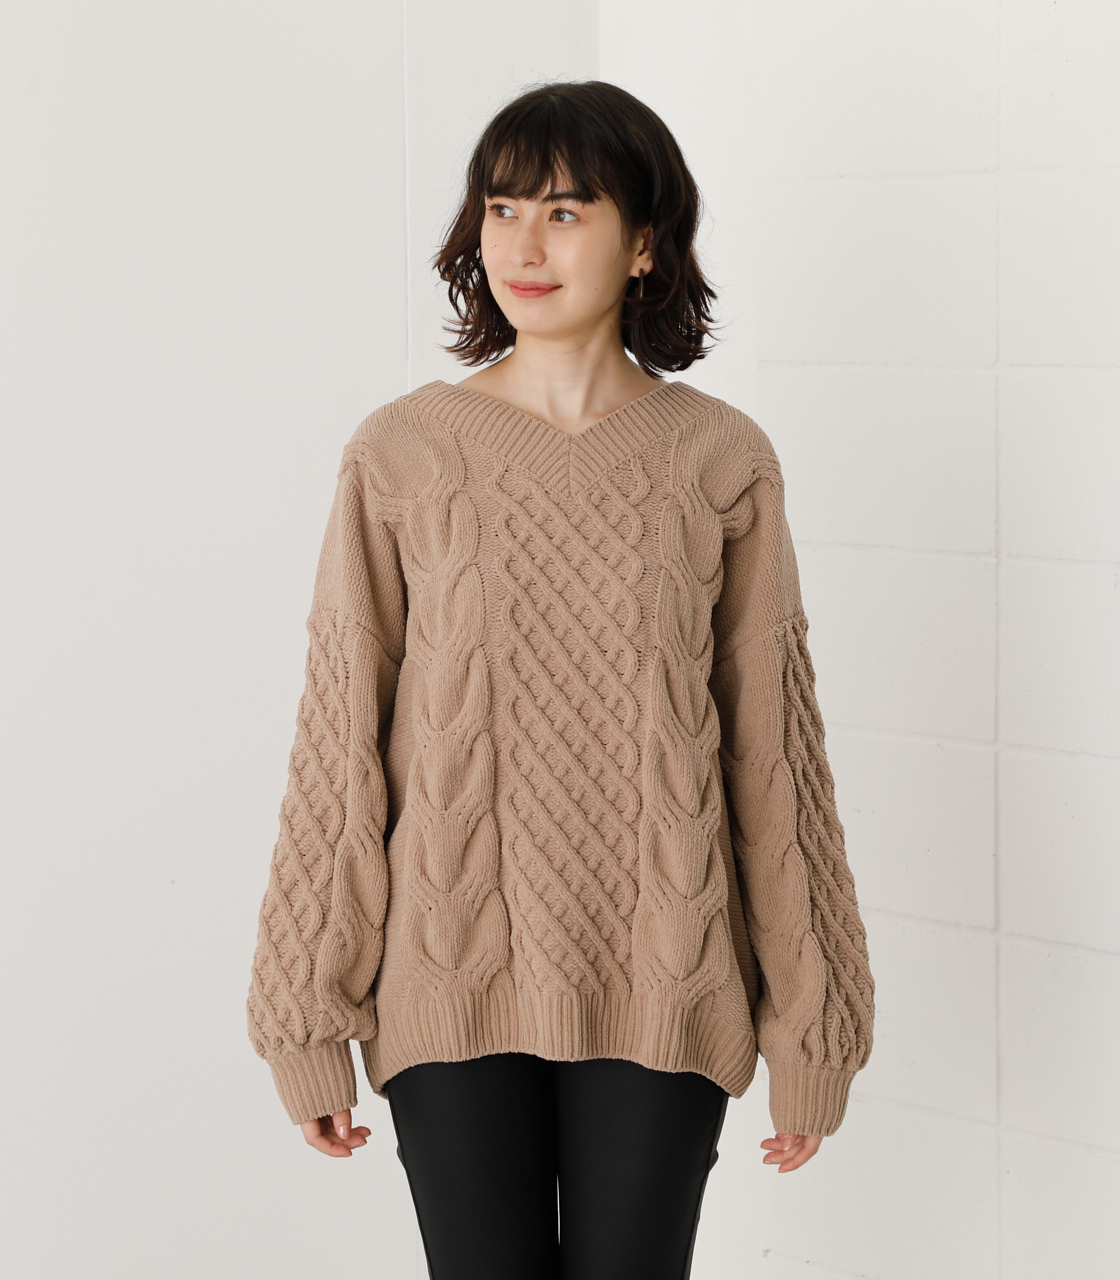 CHENILLE CABLE V/N KNIT TOPS/シェニールケーブルVネックニットトップス 詳細画像 BEG 4